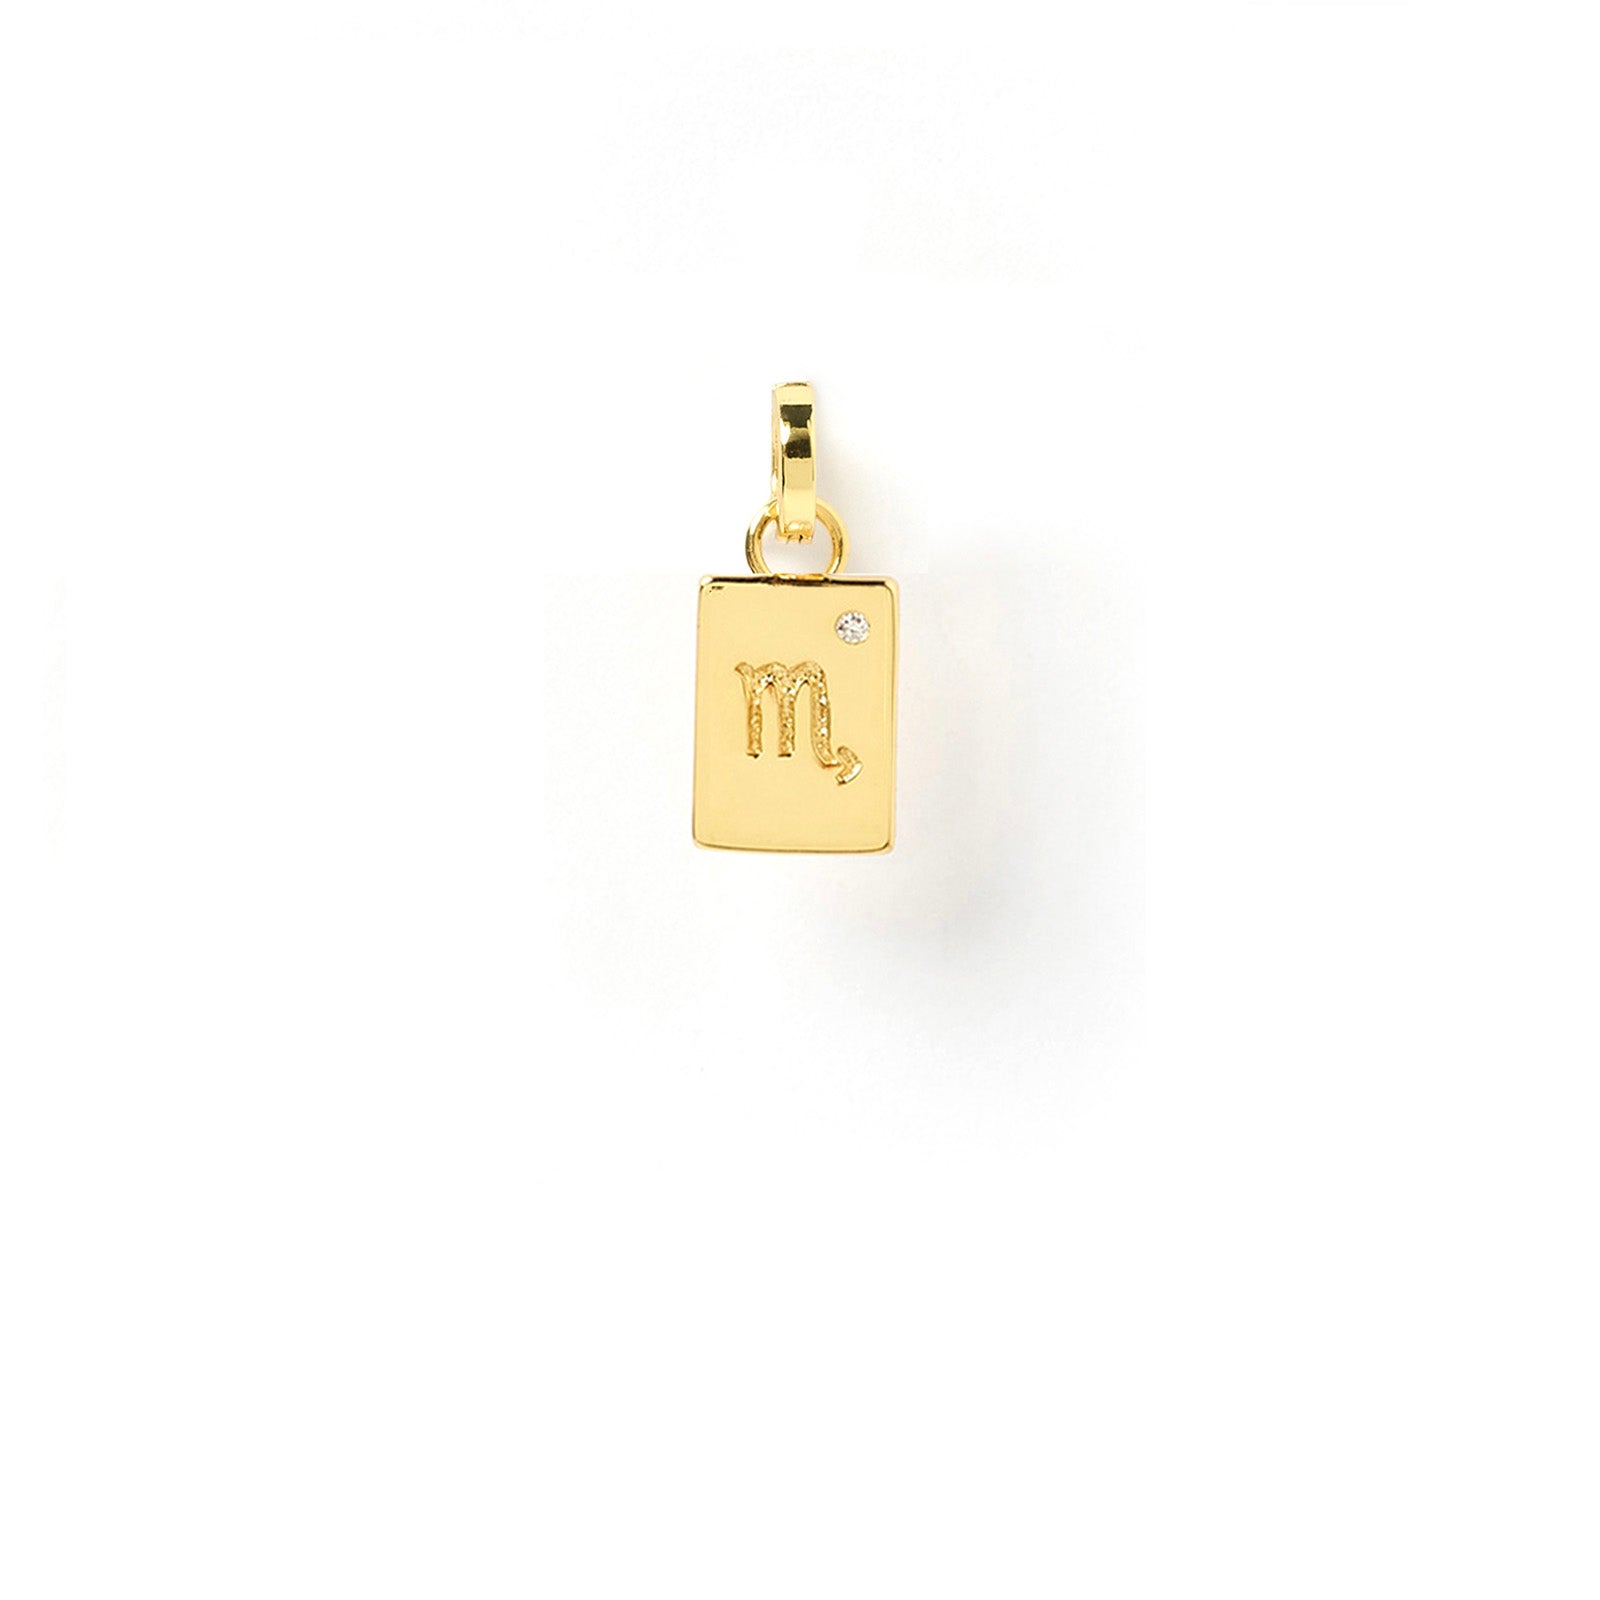 Arms Of Eve gold tag charm with the Scorpio zodiac sign and a diamond, a perfect combination for astrology enthusiasts